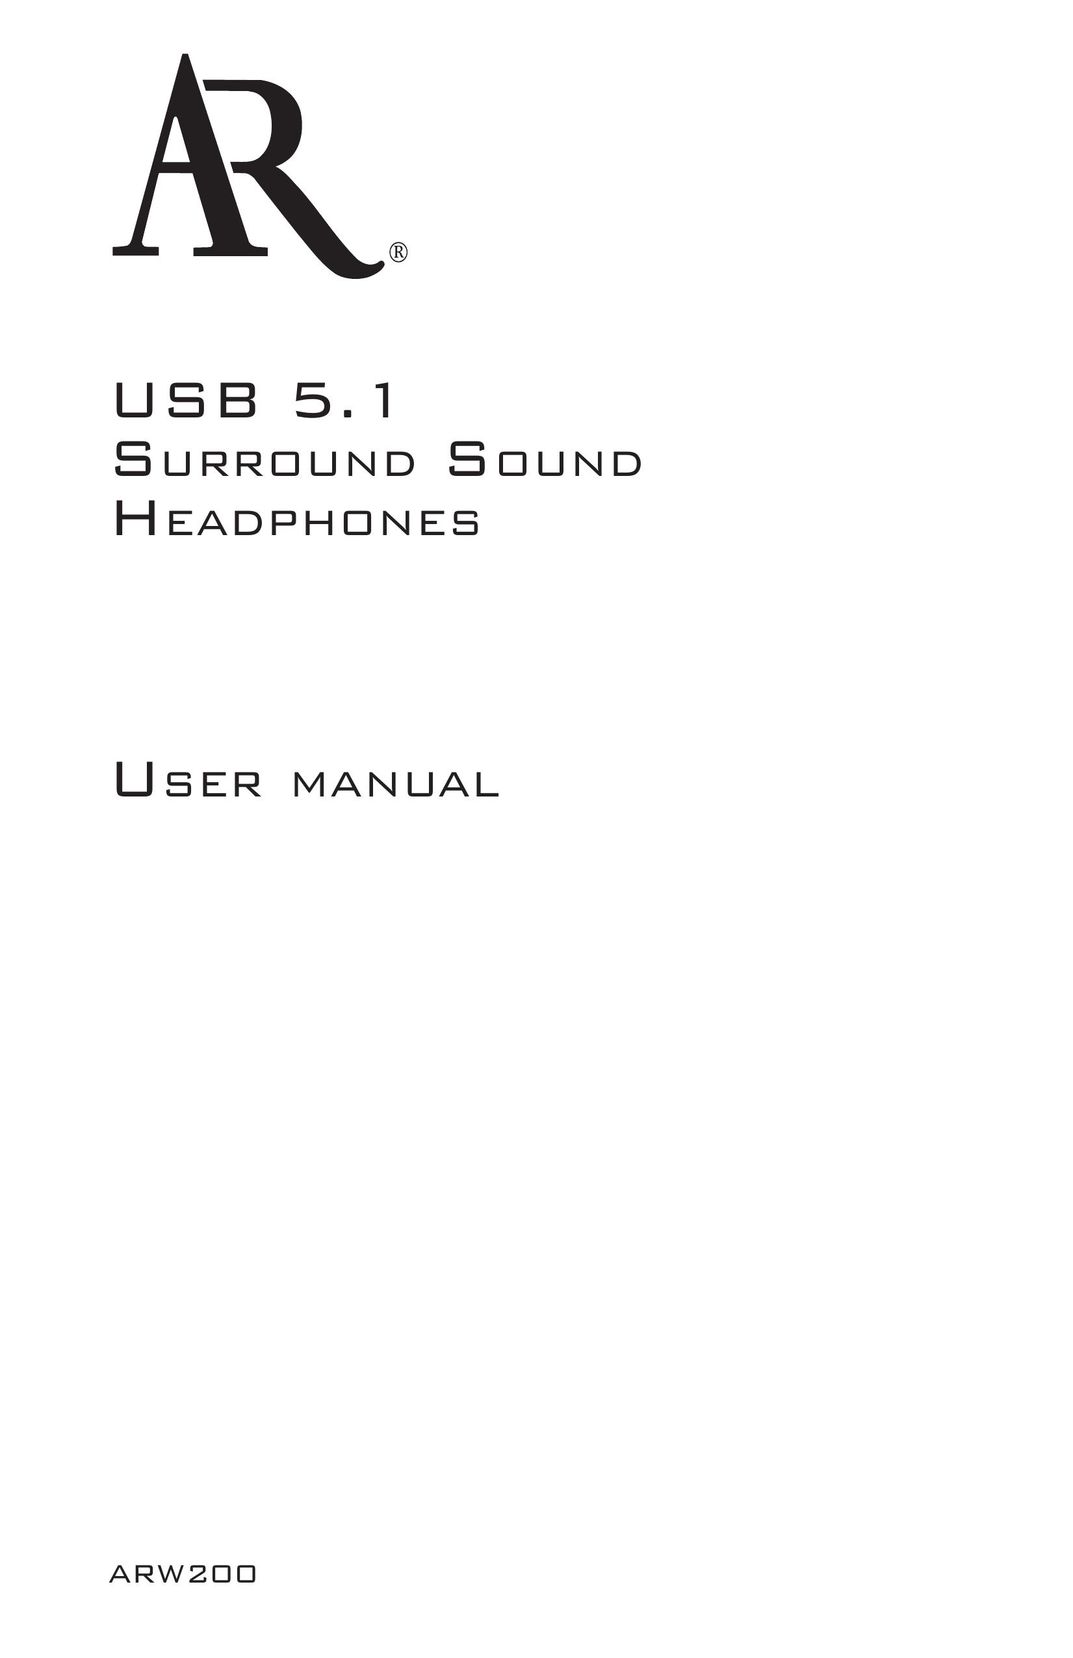 Acoustic Research ARW200 Headphones User Manual (Page 1)